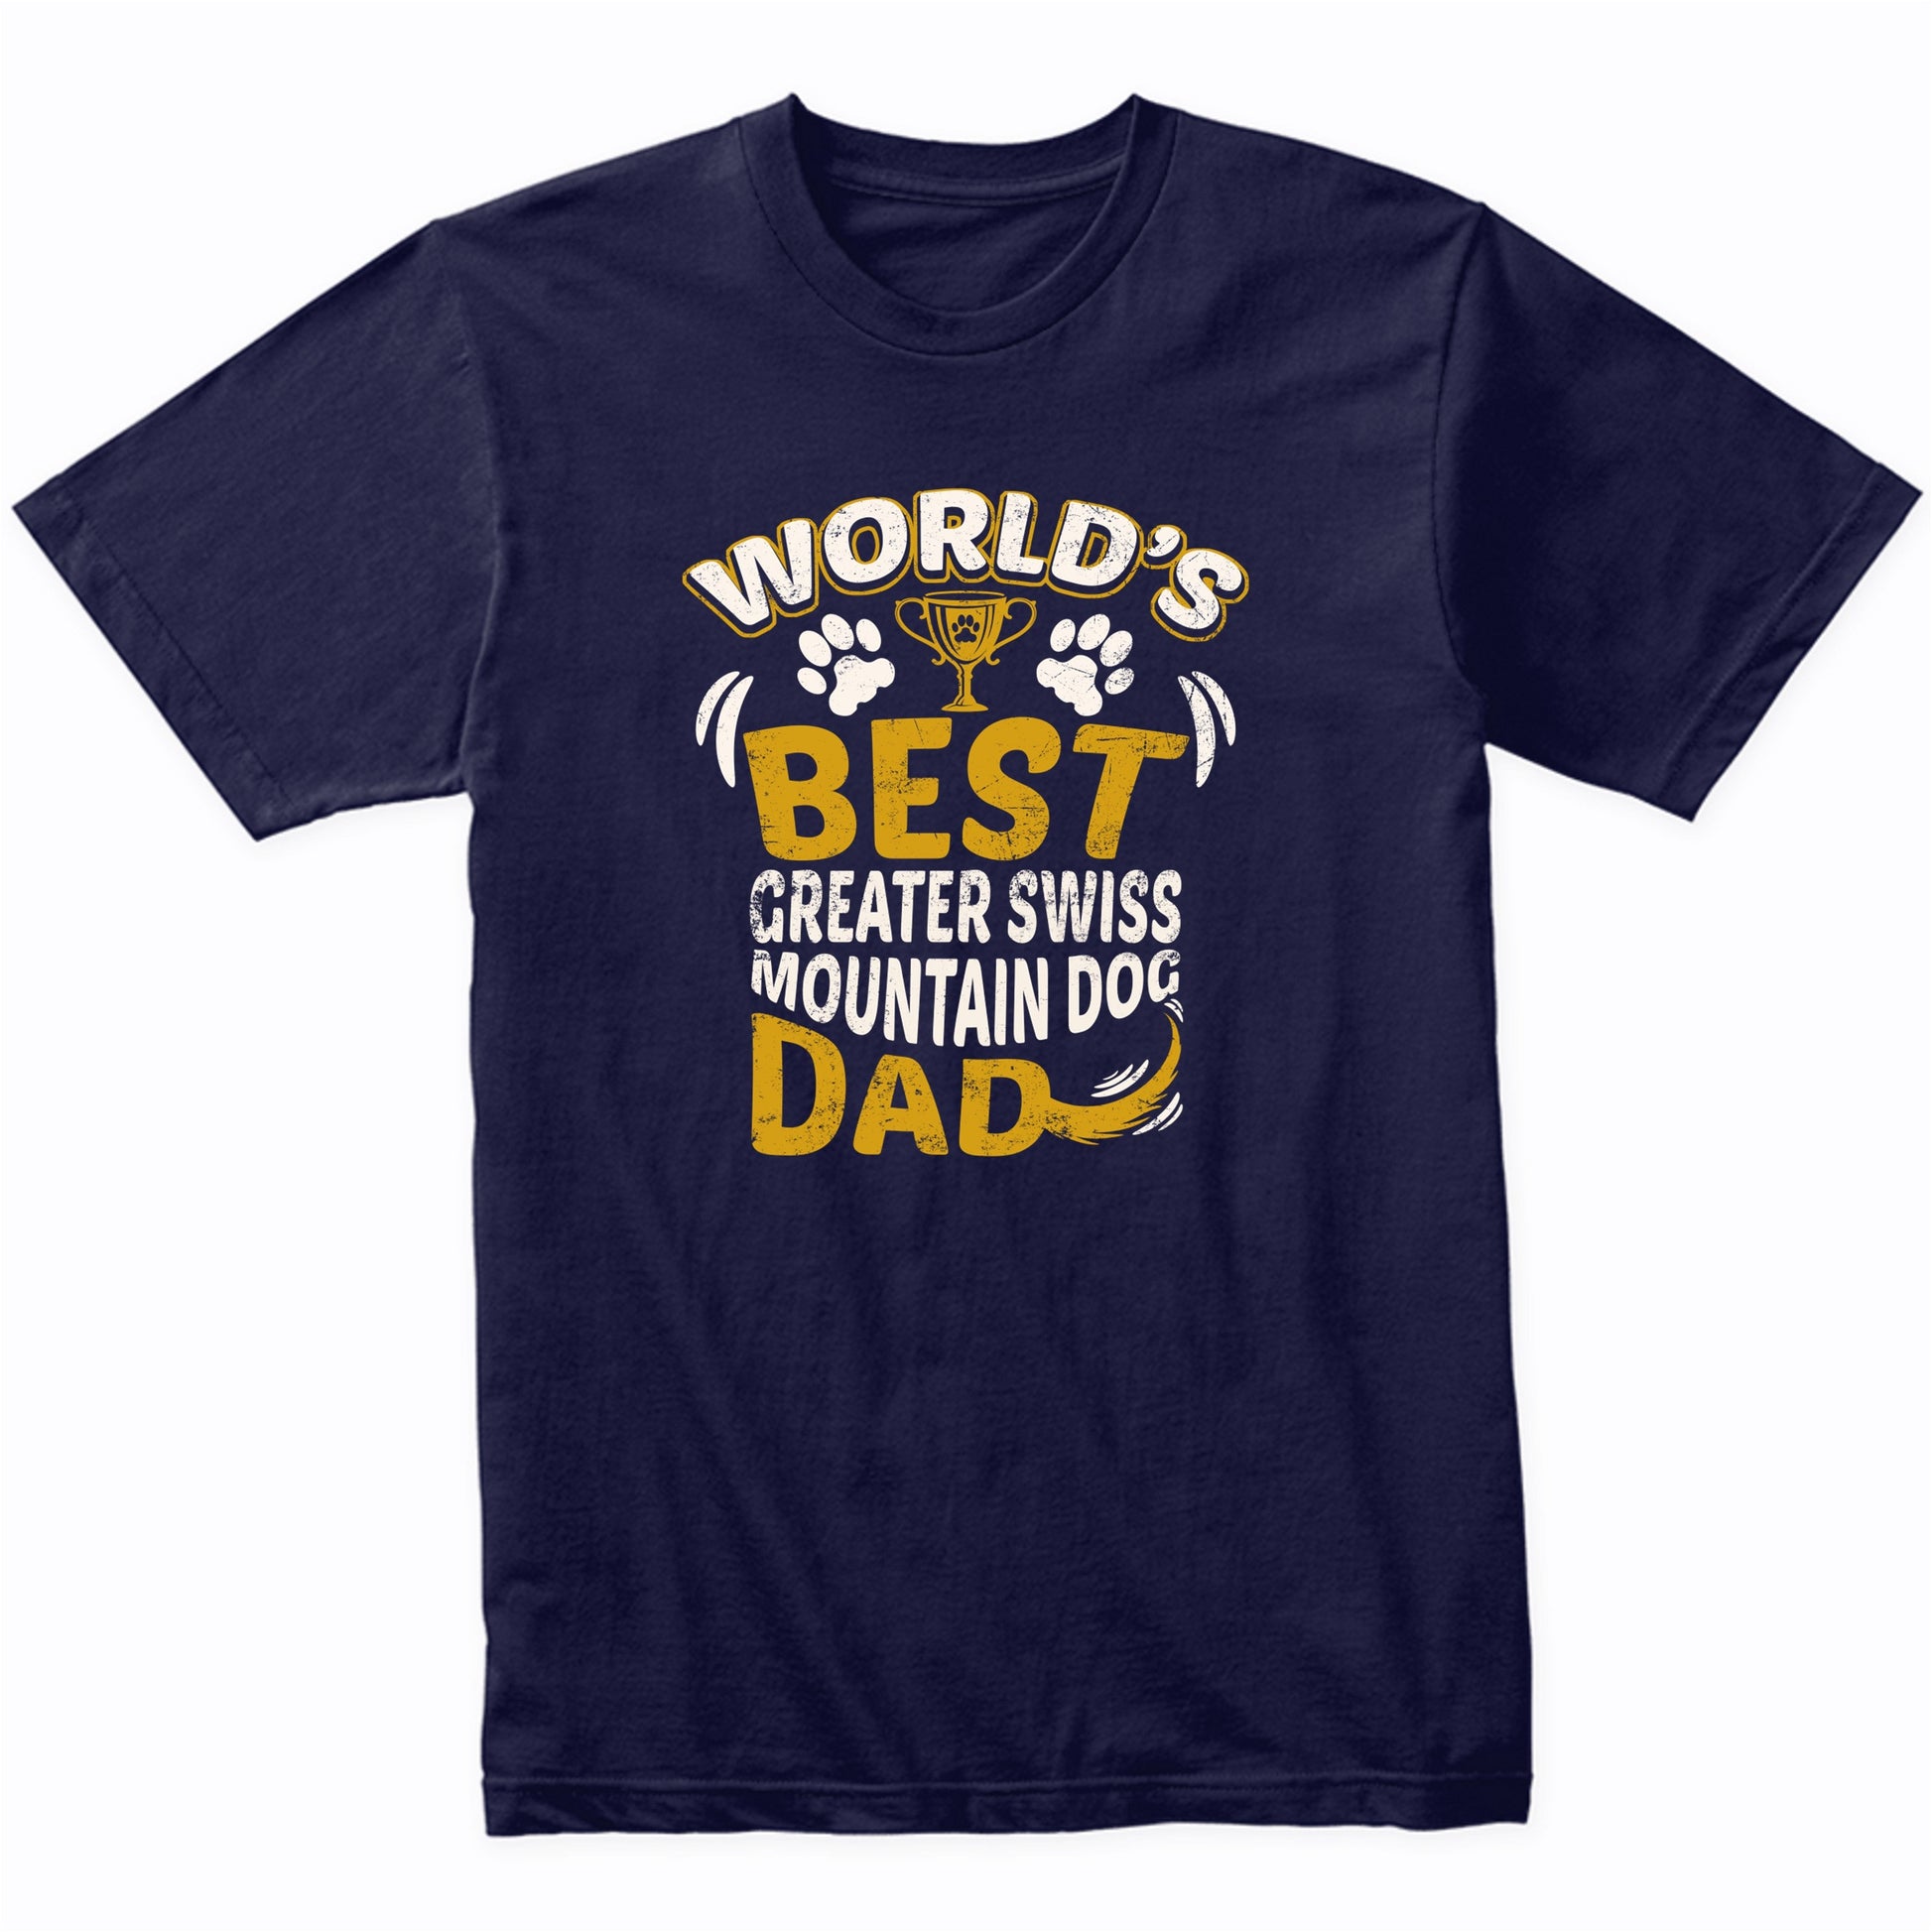 World's Best Greater Swiss Mountain Dog Dad Graphic T-Shirt